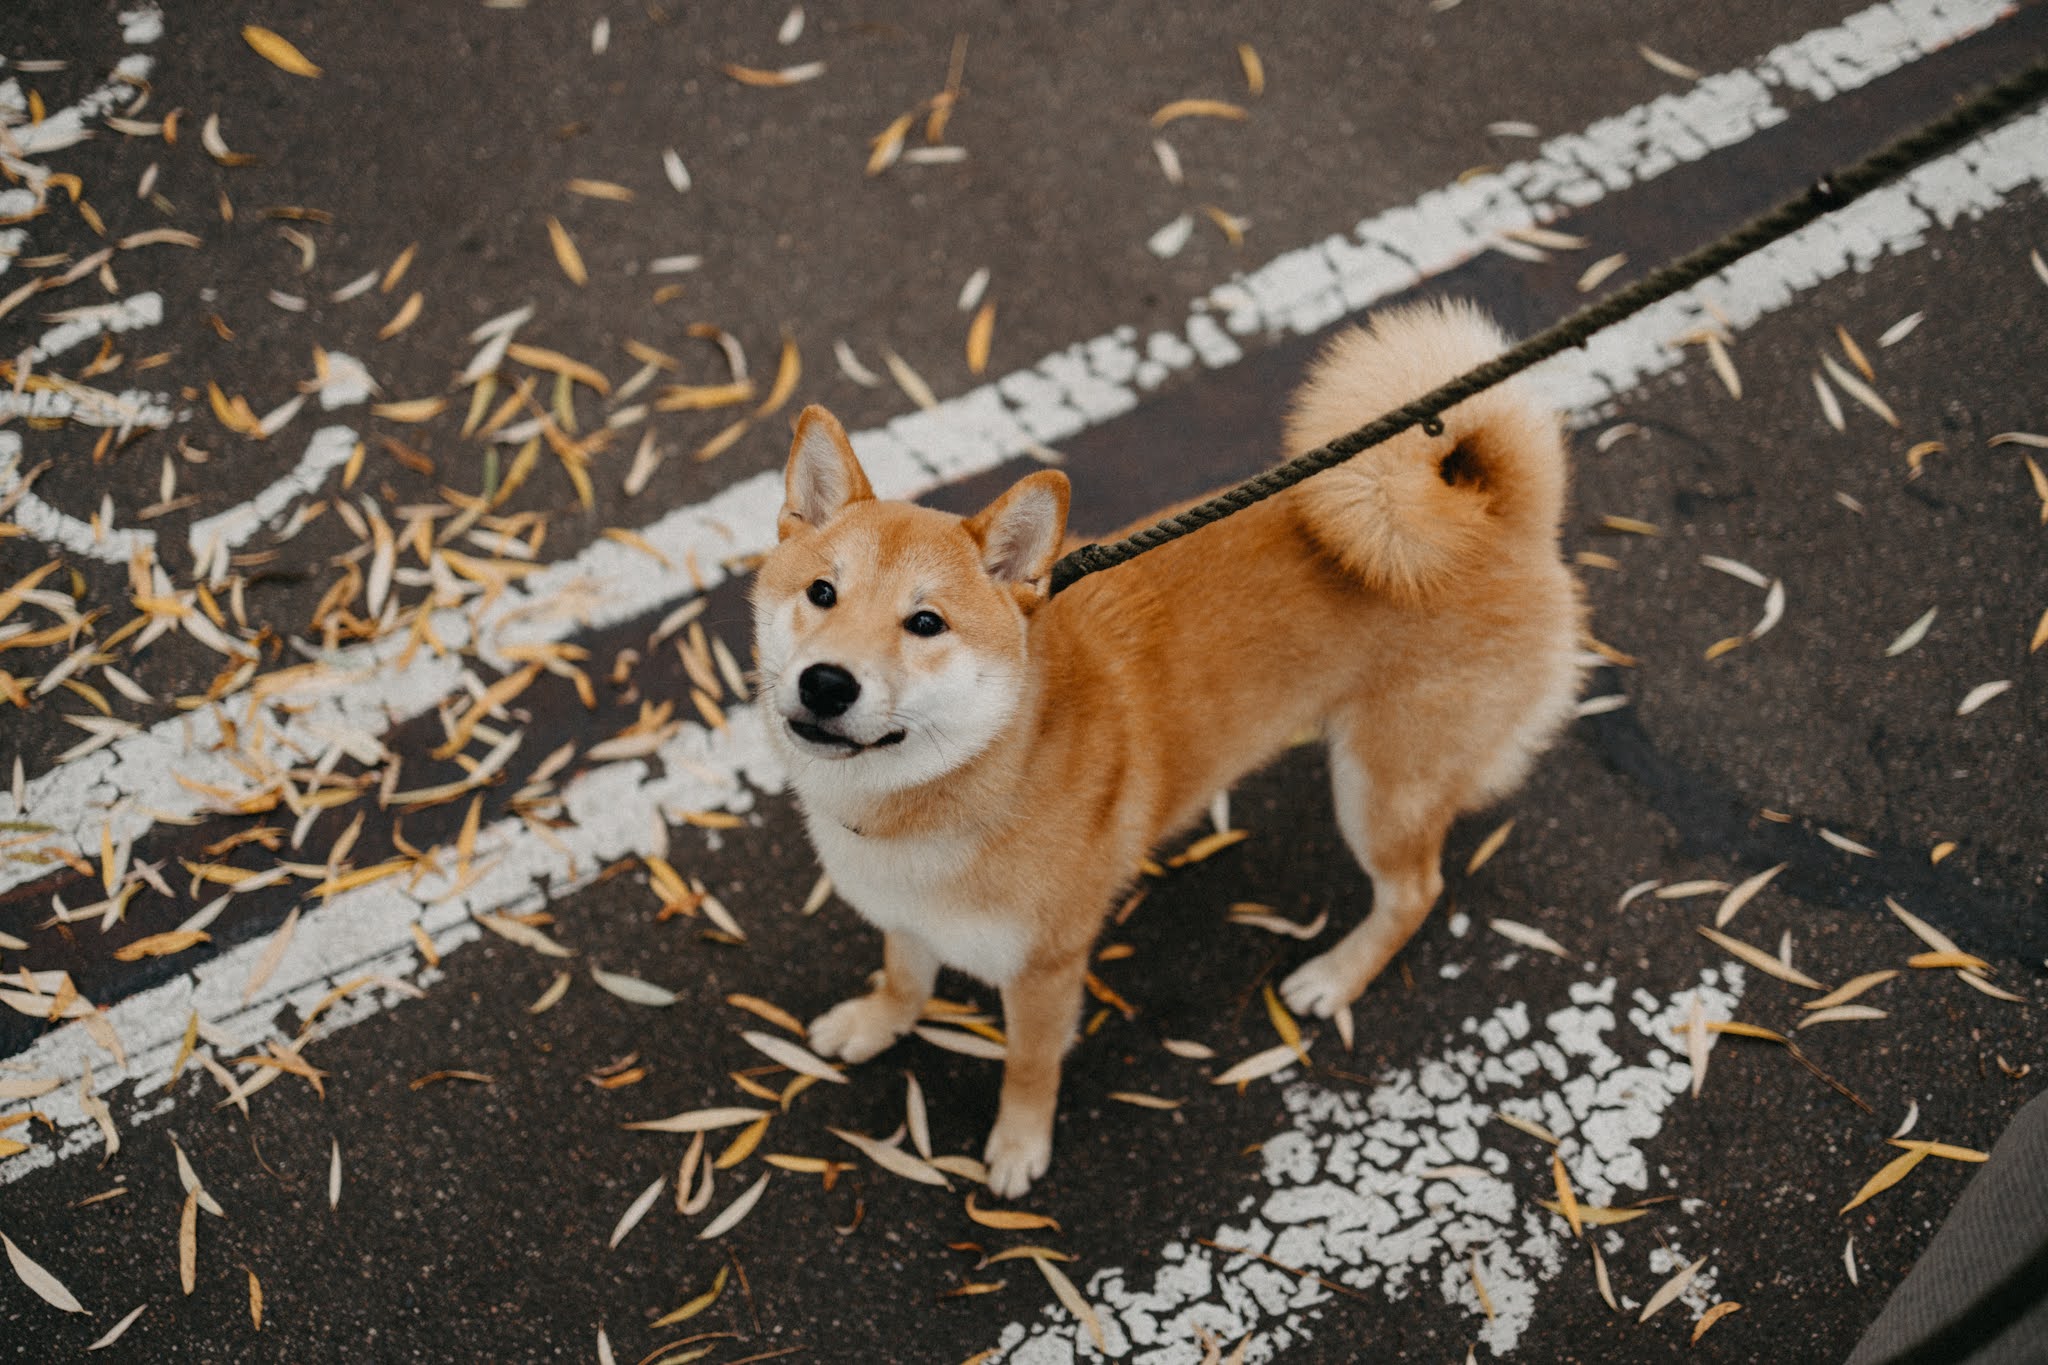 DOGE, SHIB Meltdown These 4 Meme Coins Are Incredibly Rising!